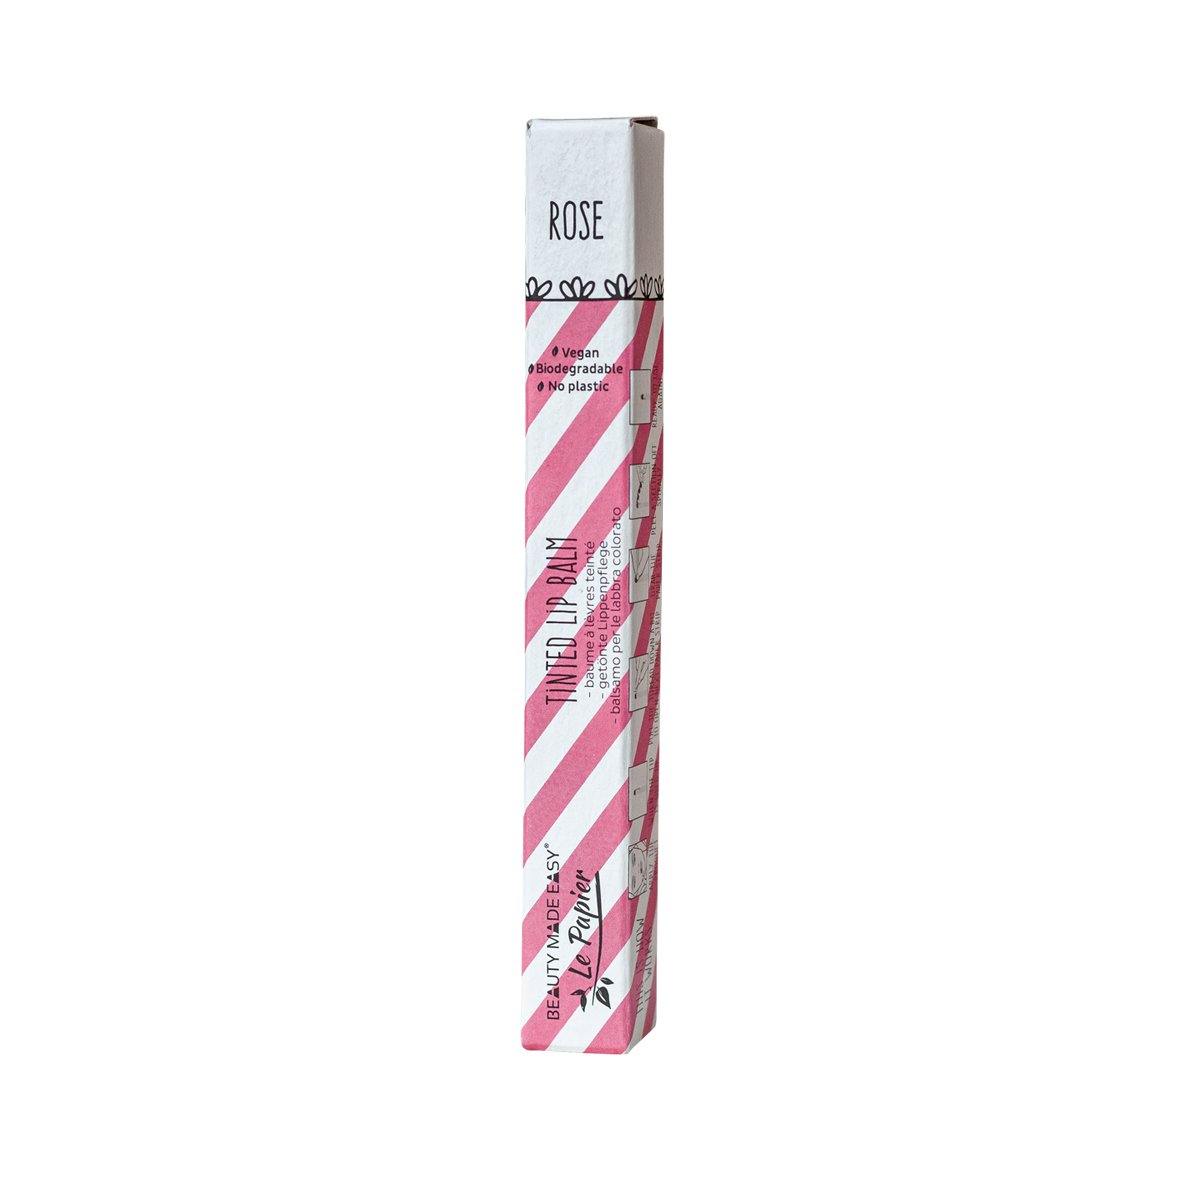 Beauty Made Easy Le Papier Rose Tinted Lip Balm in packaging